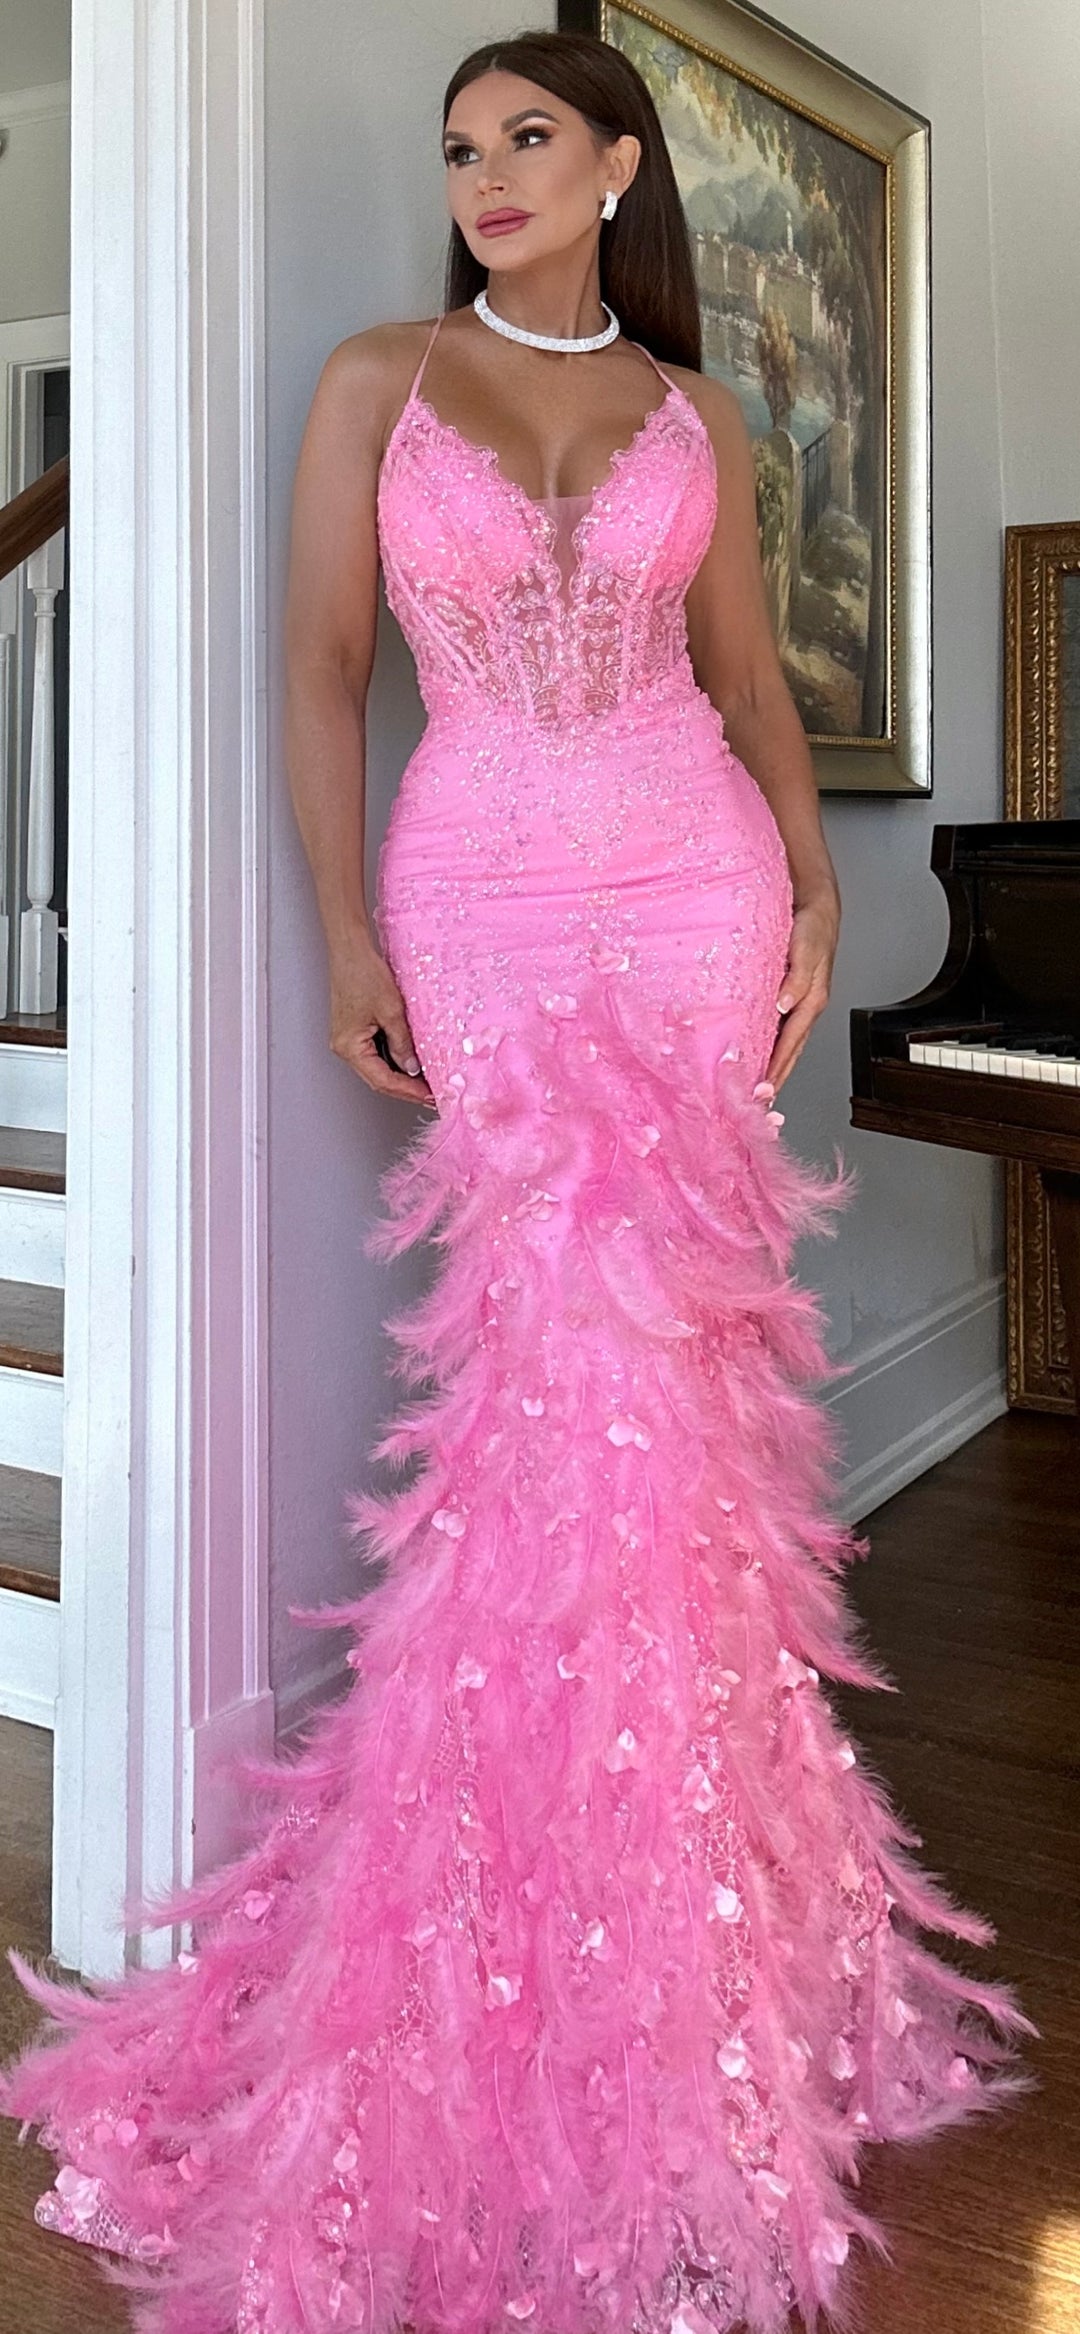 Marlo Flame Hot Pink mermaid gown with feather details